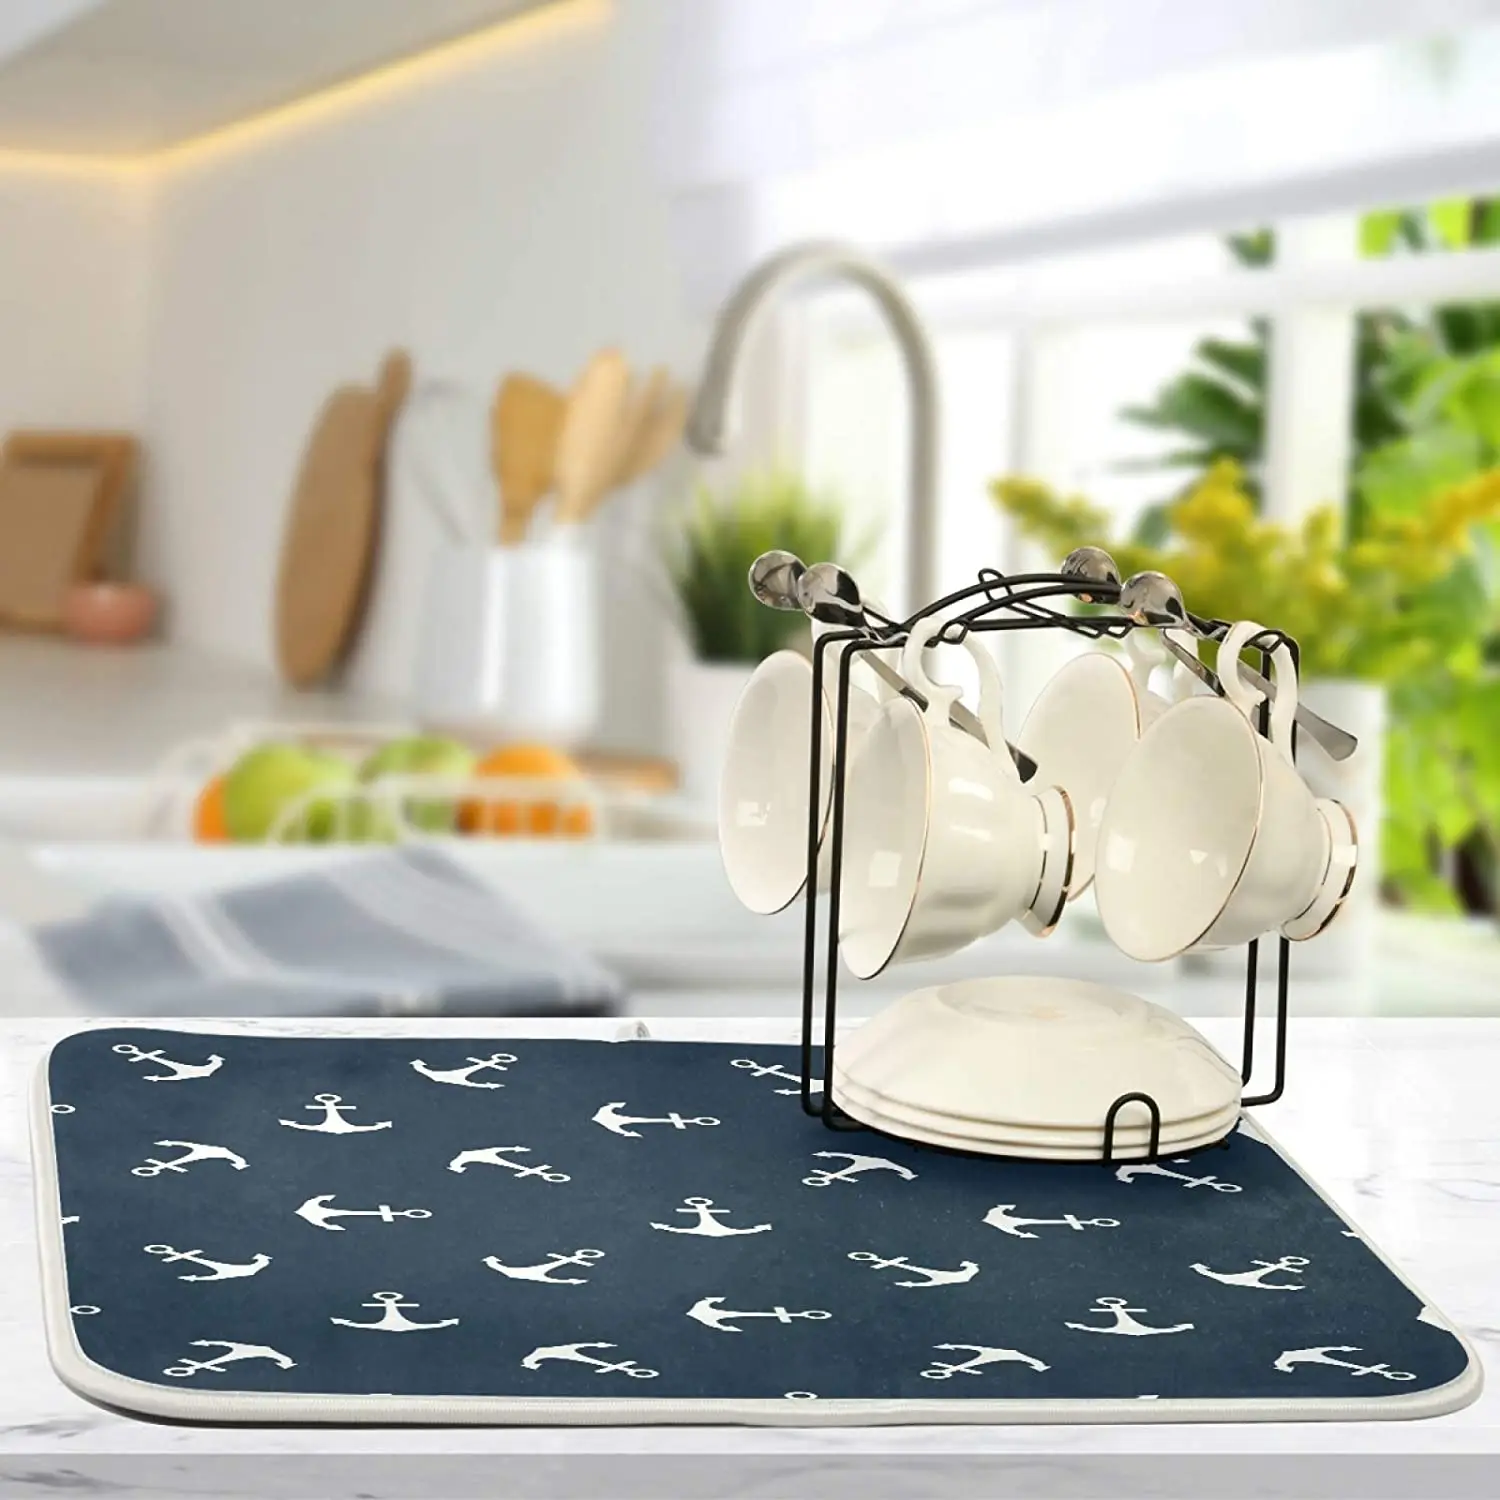 https://ae01.alicdn.com/kf/S7c885dd96ffd401db650425e2b1a2d50J/Nautical-Anchor-Ocean-Sea-Blue-Dish-Drying-Mat-for-Kitchen-Counter-Dish-Drainer-Mat-Protector-for.jpg